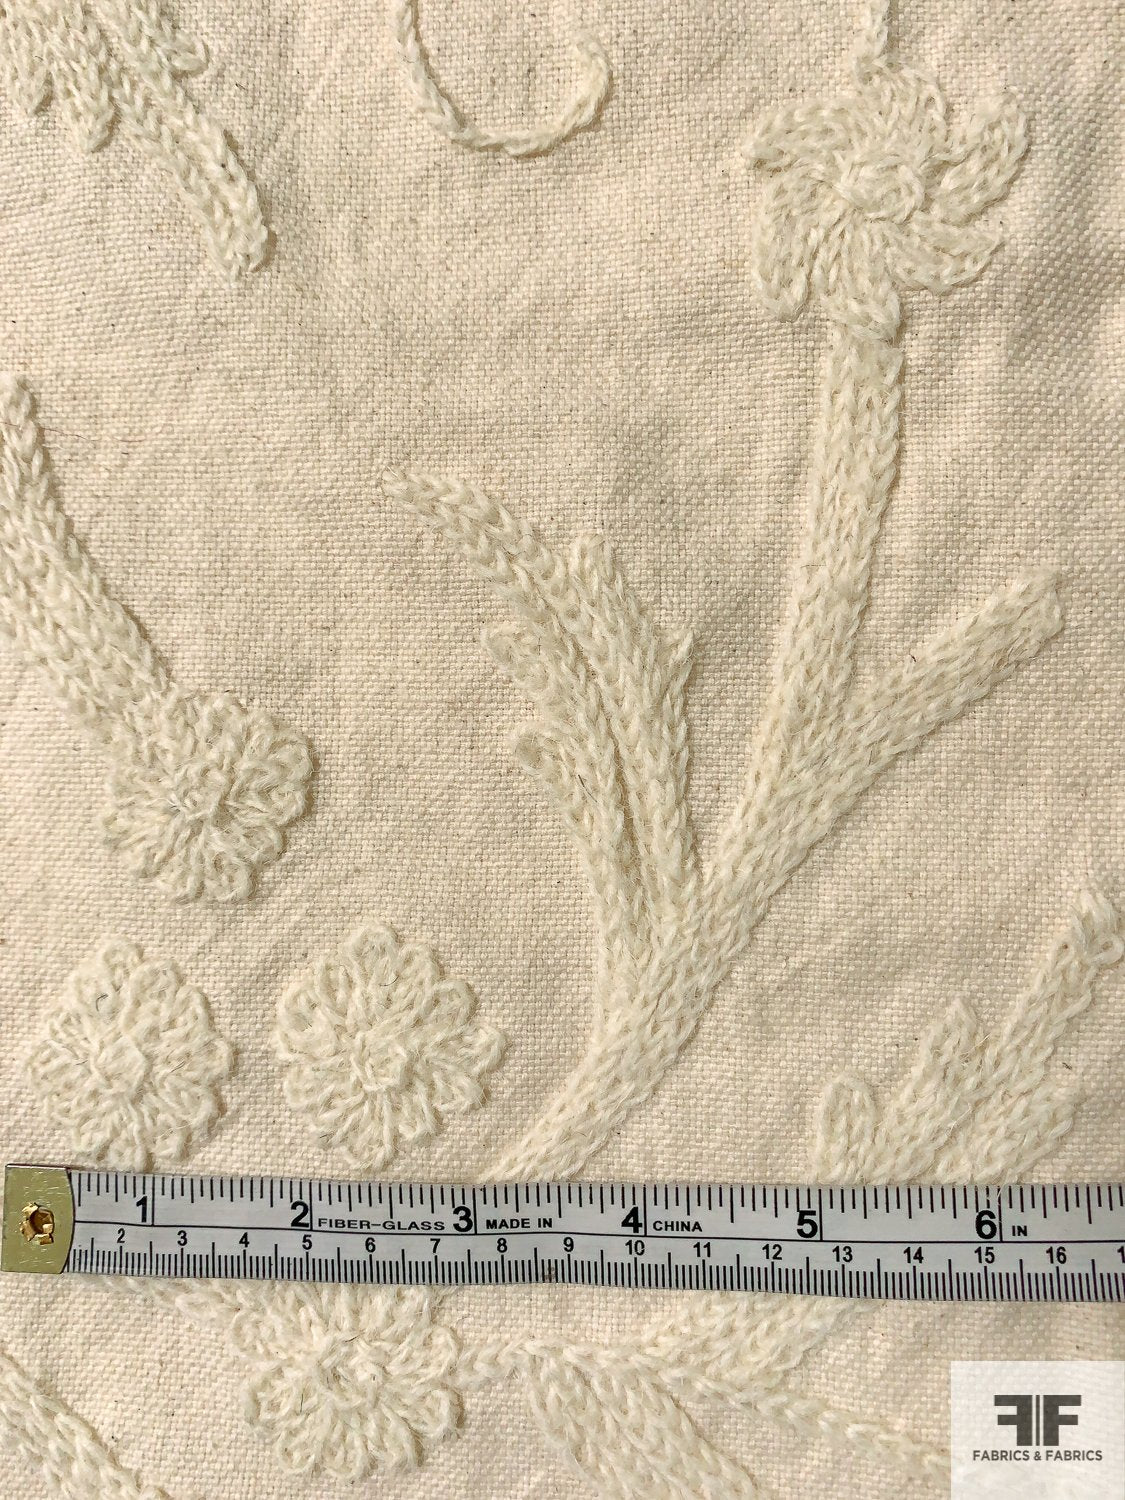 Laundered Cotton Canvas with Wool Yarned Floral Embroidery - Ivory